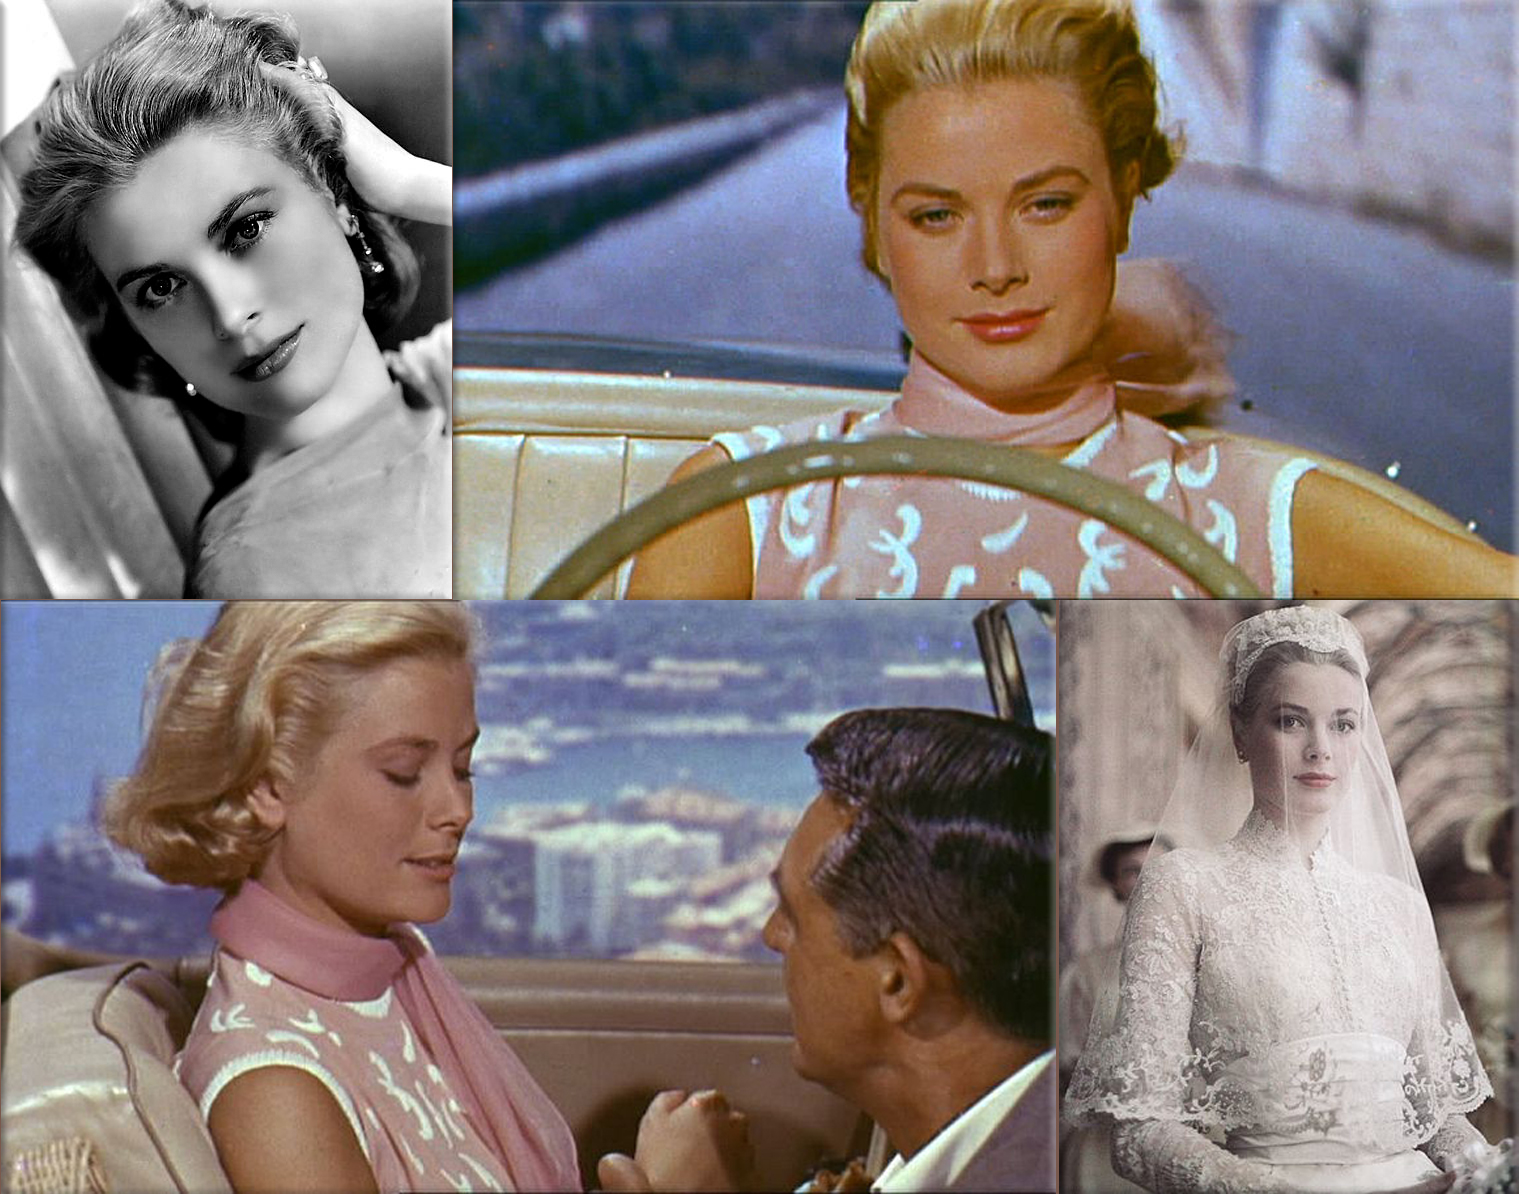 Grace Kelly: in High Society (1956) ● To Catch a Thief ● with Cary Grant in To Catch a Thief ● Grace Kelly in her wedding dress